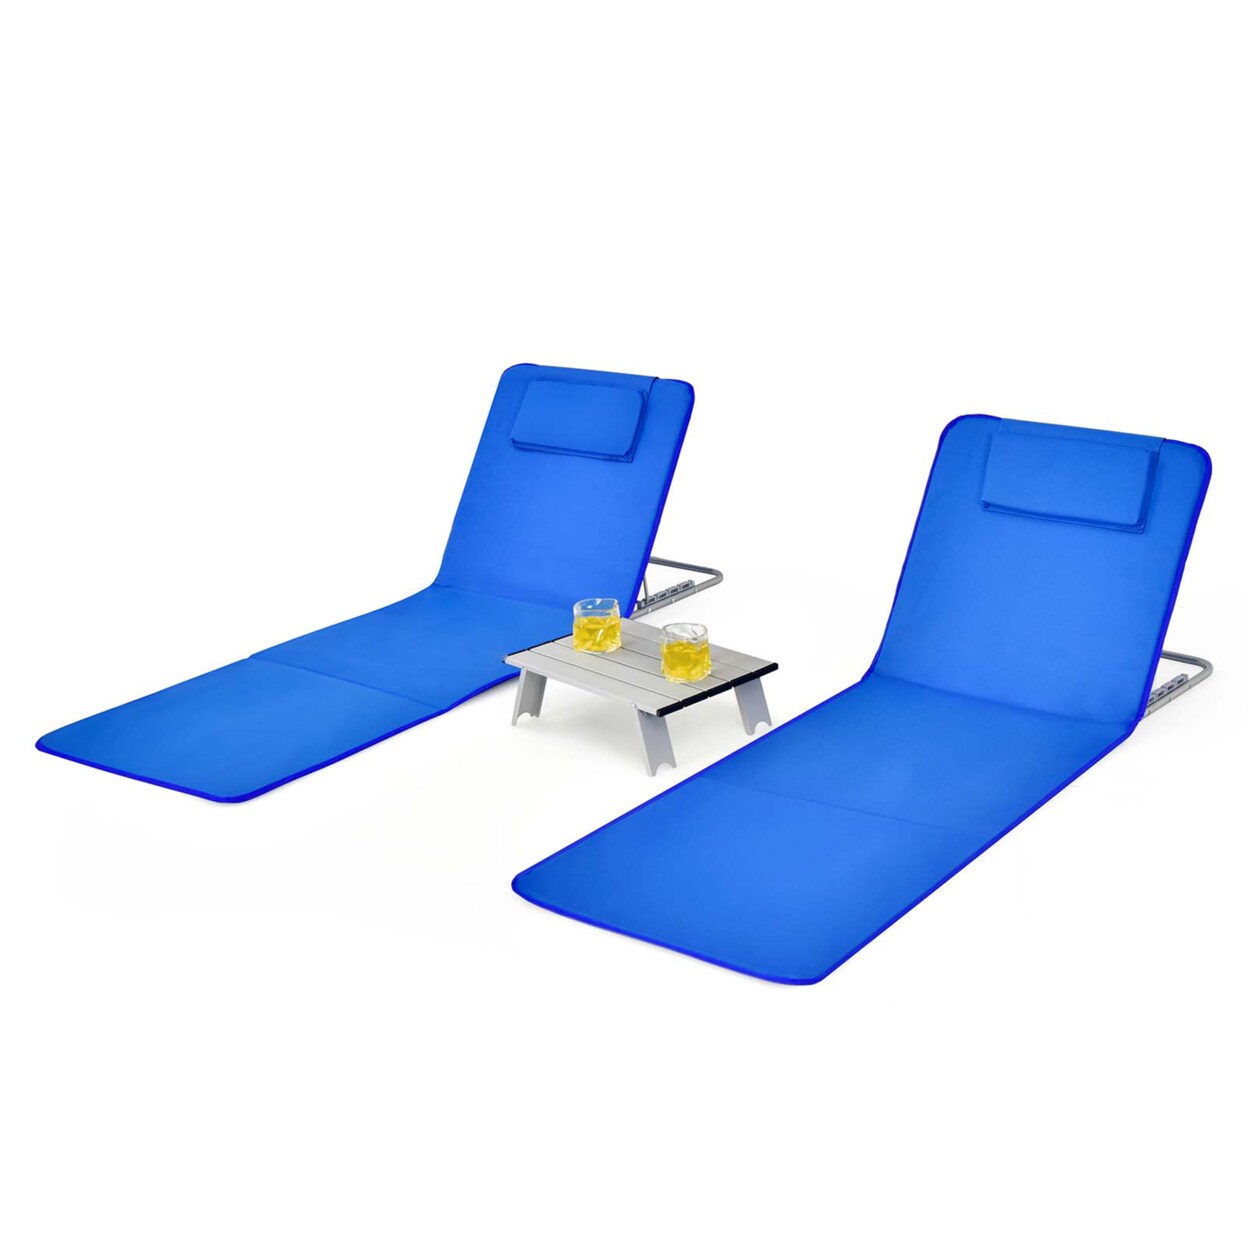 Gymax 3PCS Folding Beach Mat Set Adjustable Beach Lounge Chair and Side Table Set